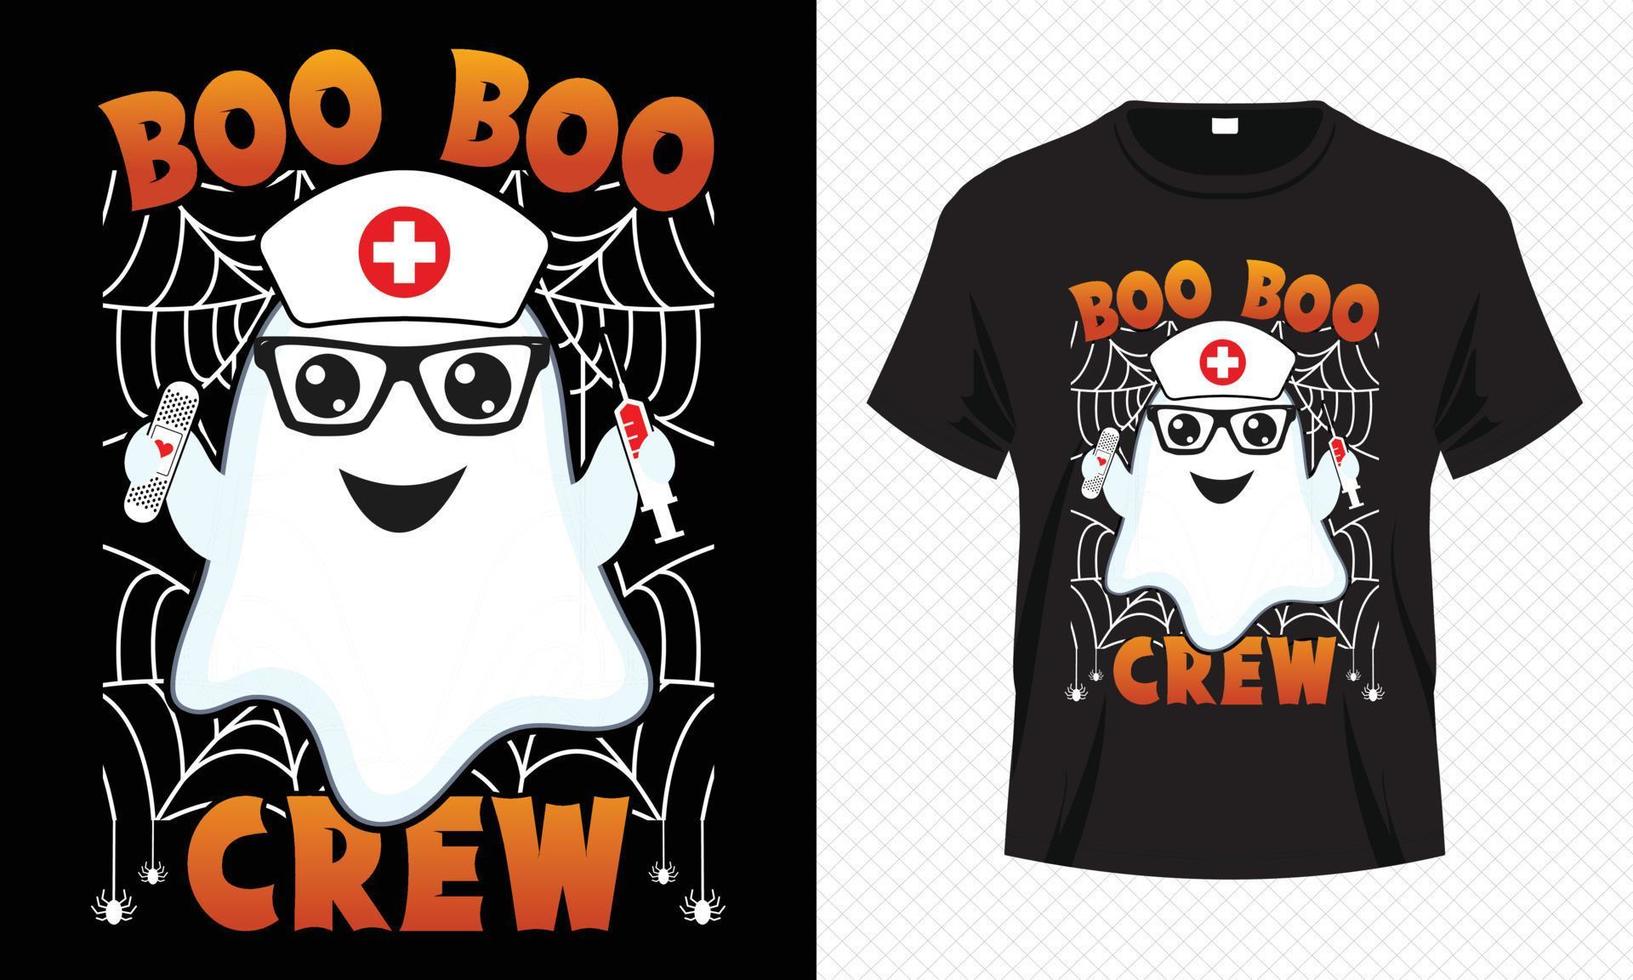 Boo Boo Crew - Happy Halloween t-shirt design vector template. Boo Nurse t-shirt design for Halloween day. Printable Halloween Vector design of boo, nurse cap, injection, bandage and spider net.